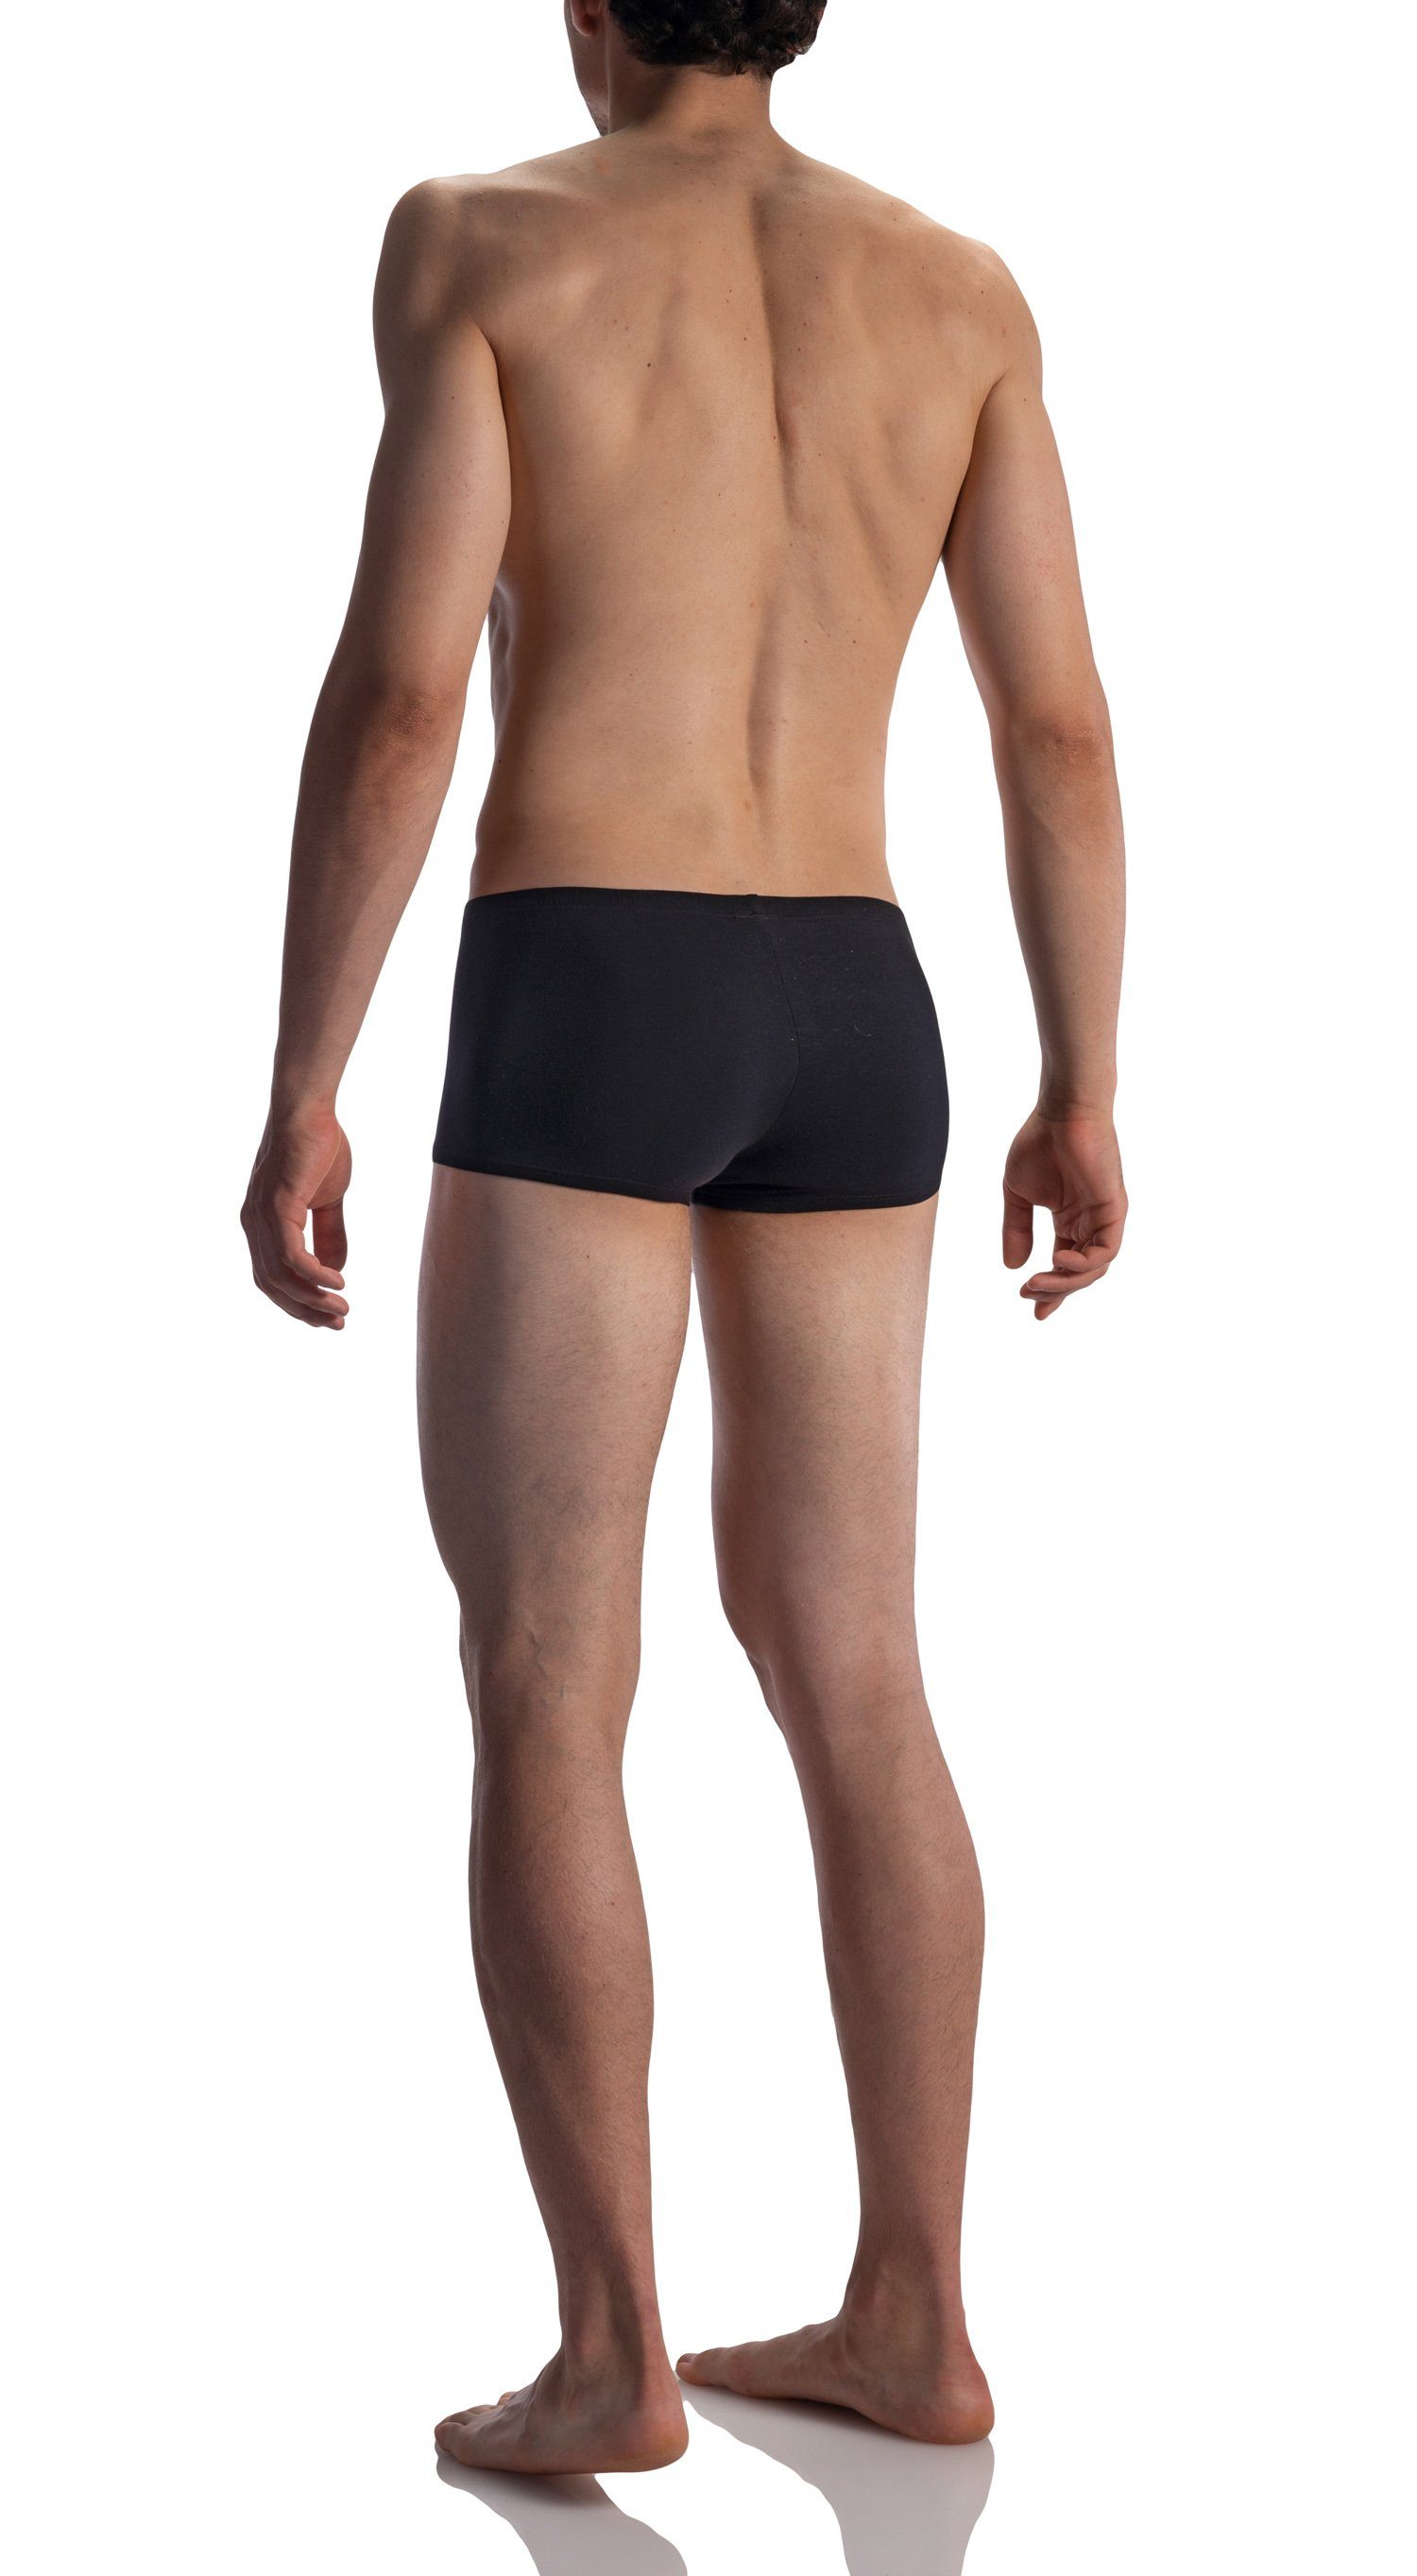 Benz Olaf Benz Boxershorts (Packung, 1601 Schwarz 2er-Pack) Olaf Minipants Doppelpack RED